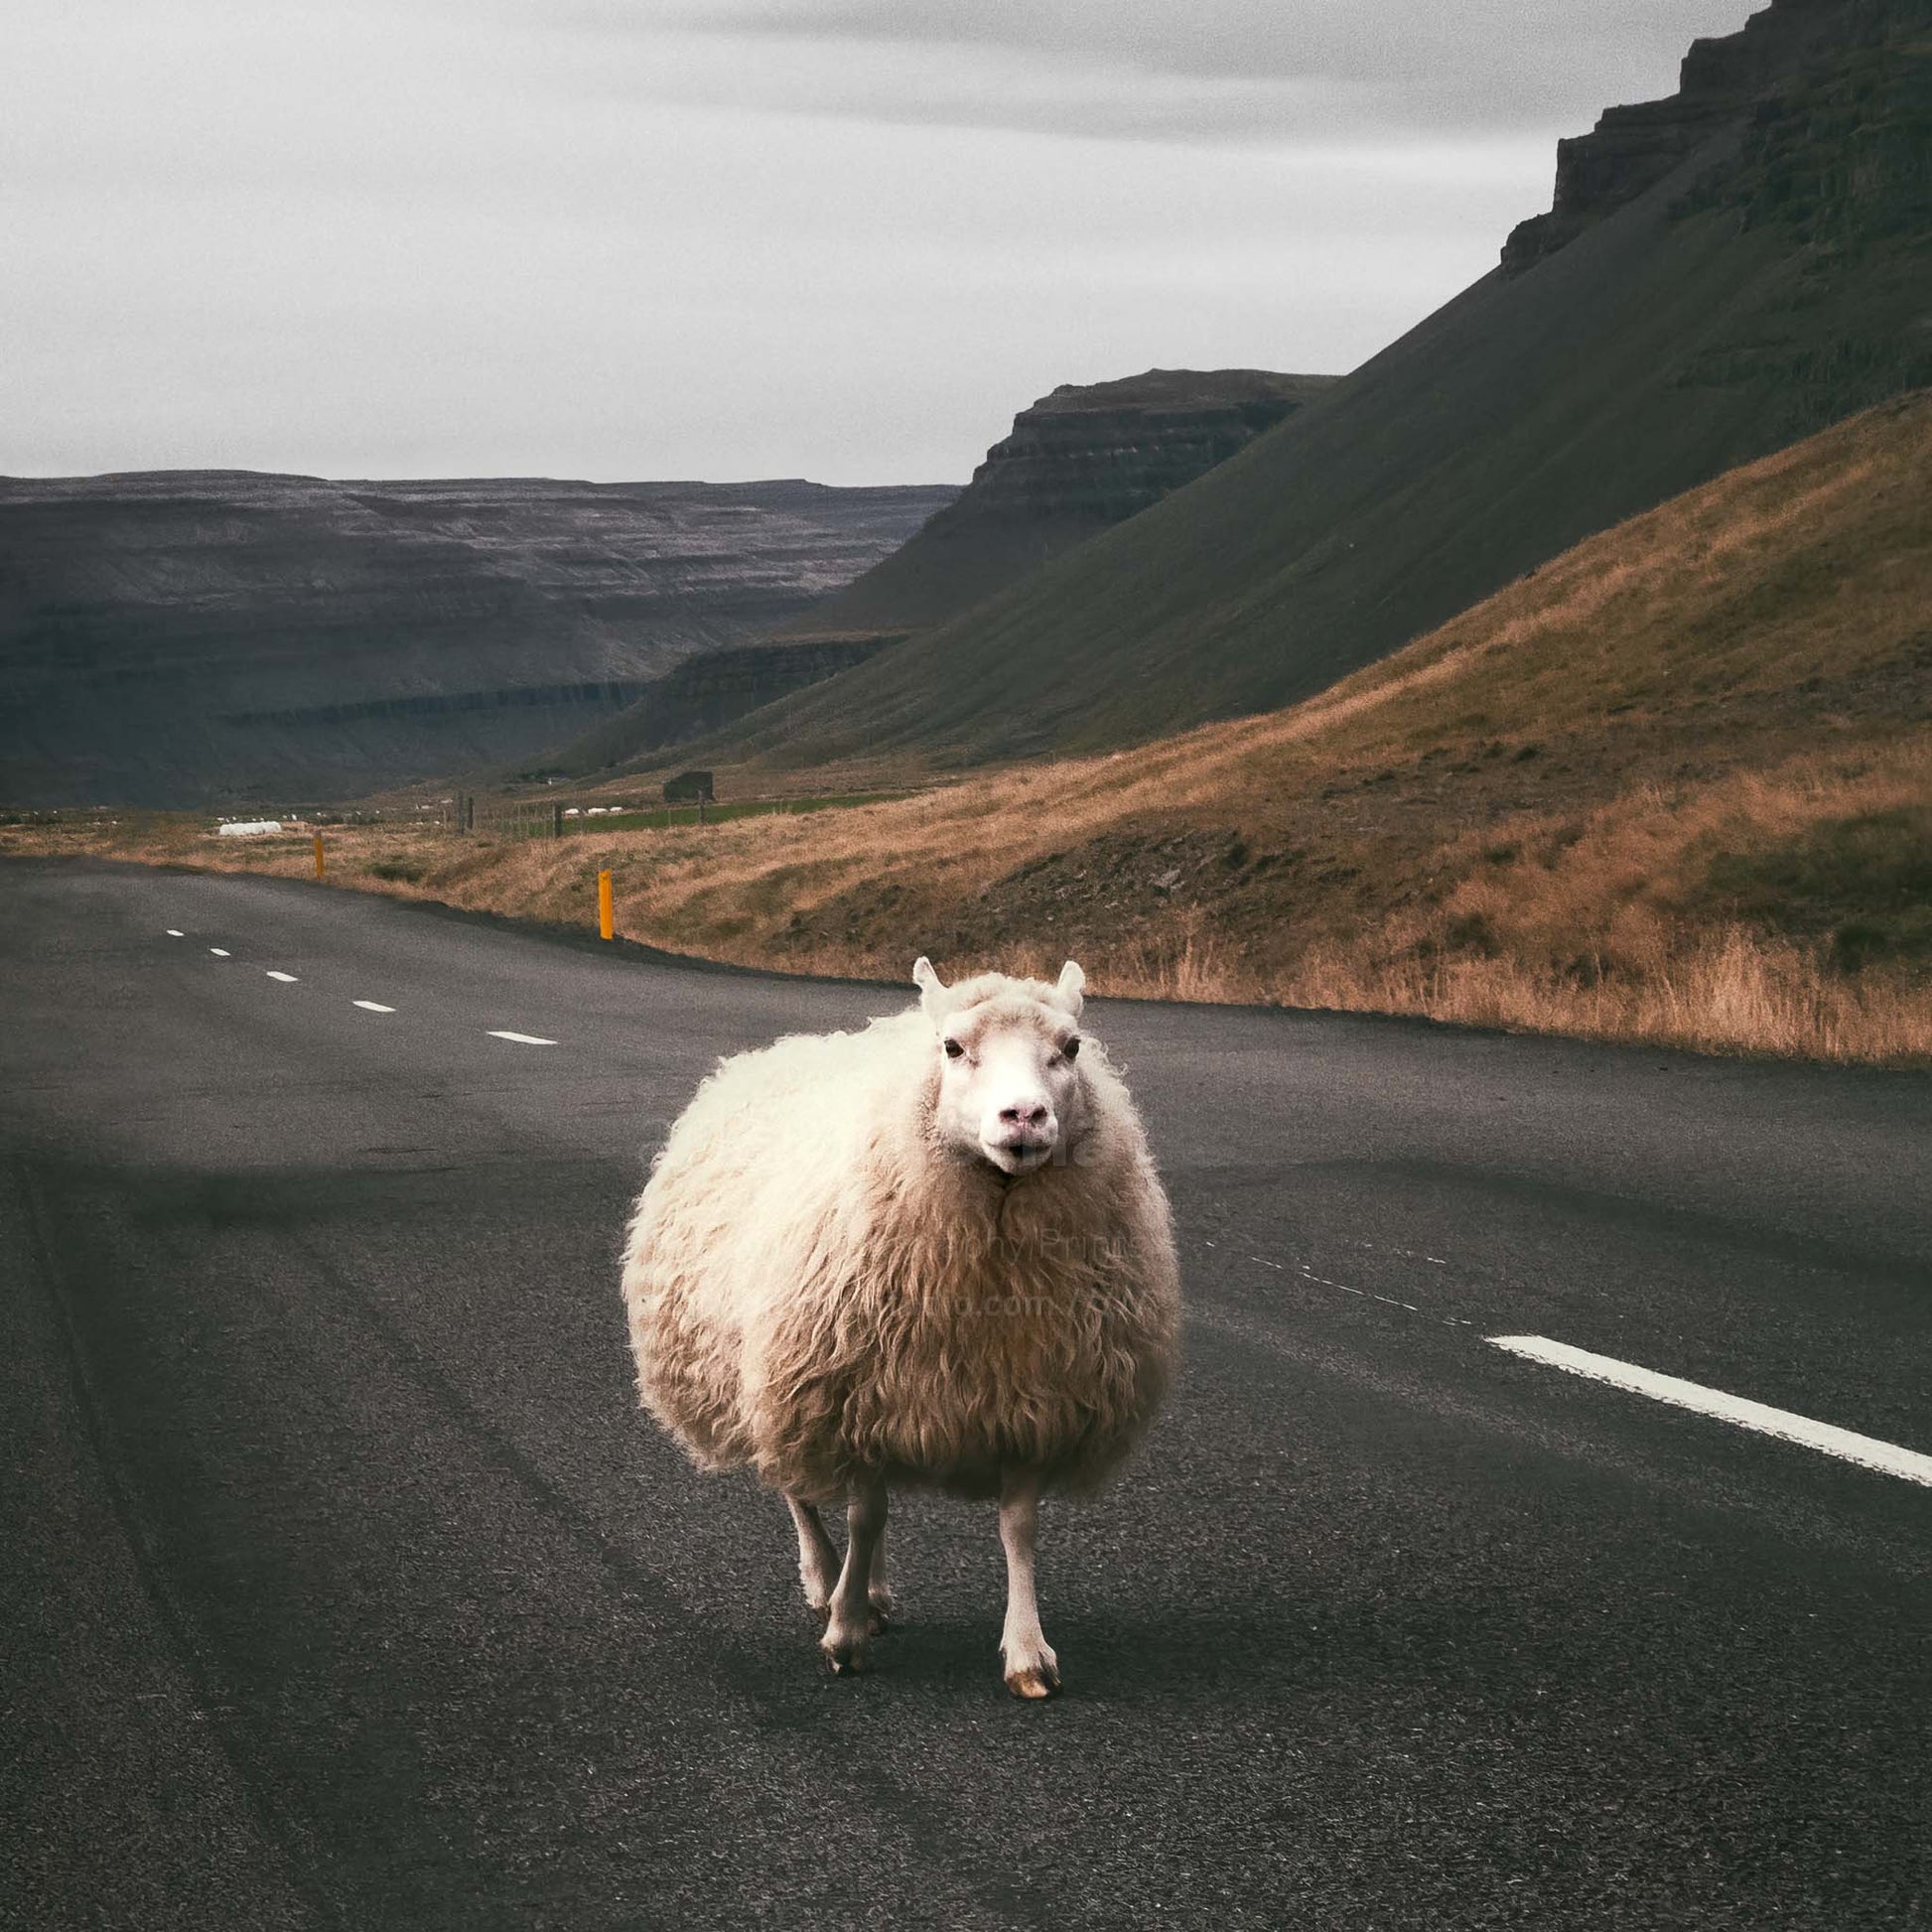 Sheep on the road in the Westfjords in Iceland photography print